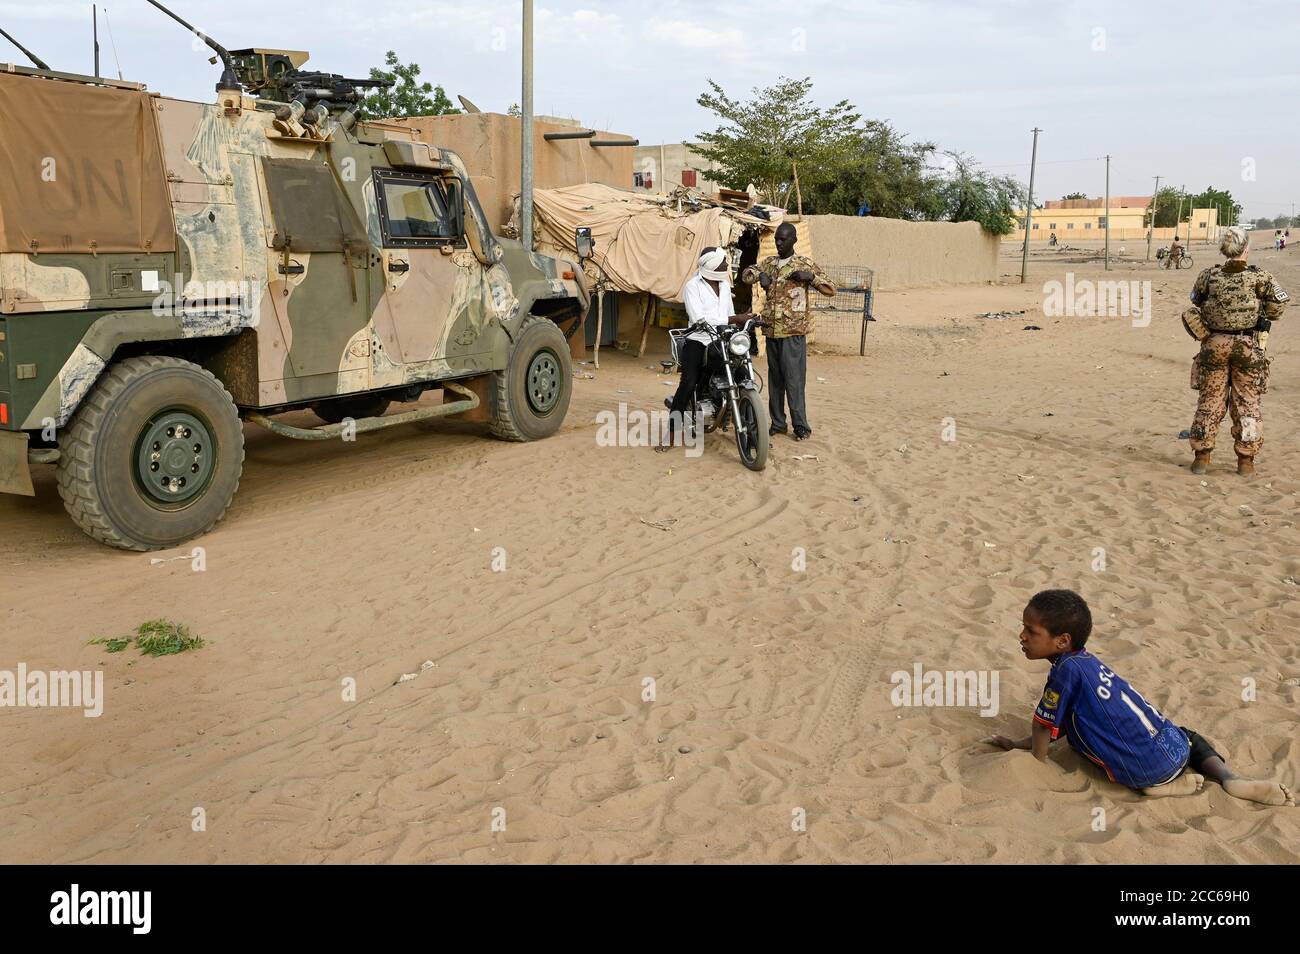 MALI, Gao, Minusma UN mission, Camp Castor, german army Bundeswehr on patrol with Eagle armored vehicle in Gao city Stock Photo